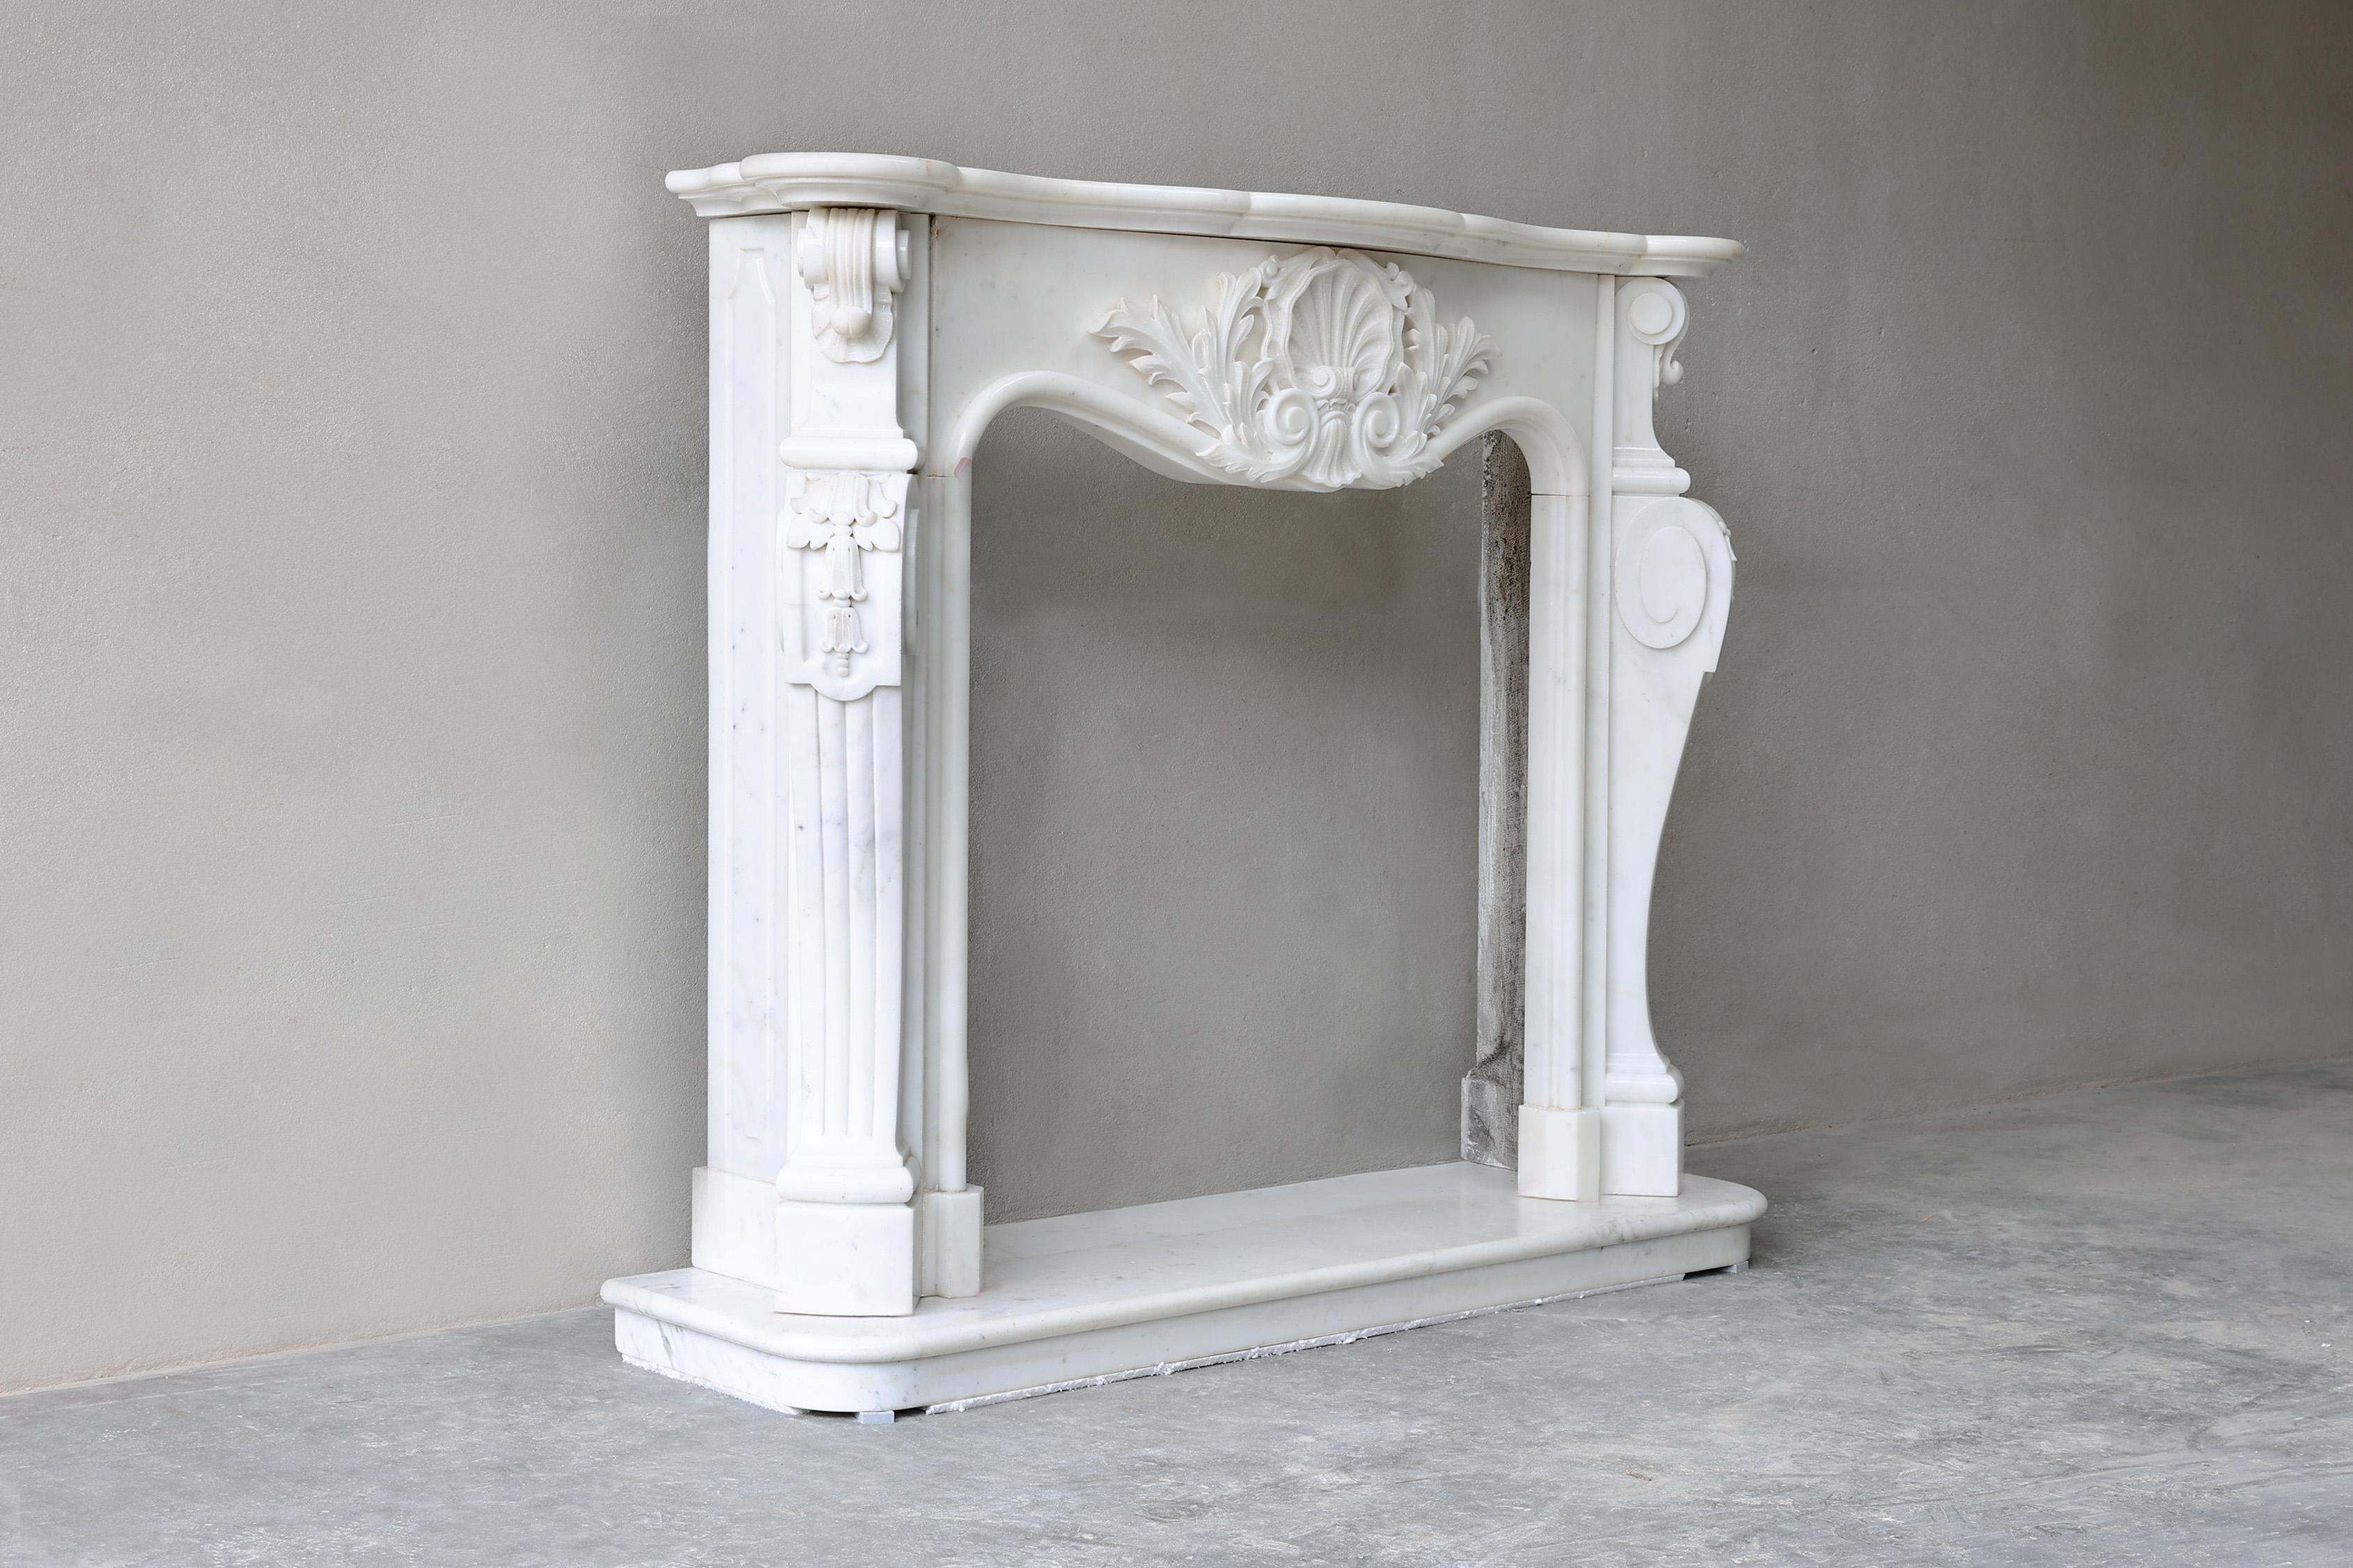 Beautiful fireplace of Carrara marble from Italy. This 20th century mantle features elegant ornaments and decorations. A graceful Louis XV style mantle that would fit perfectly in a classic or contemporary home.